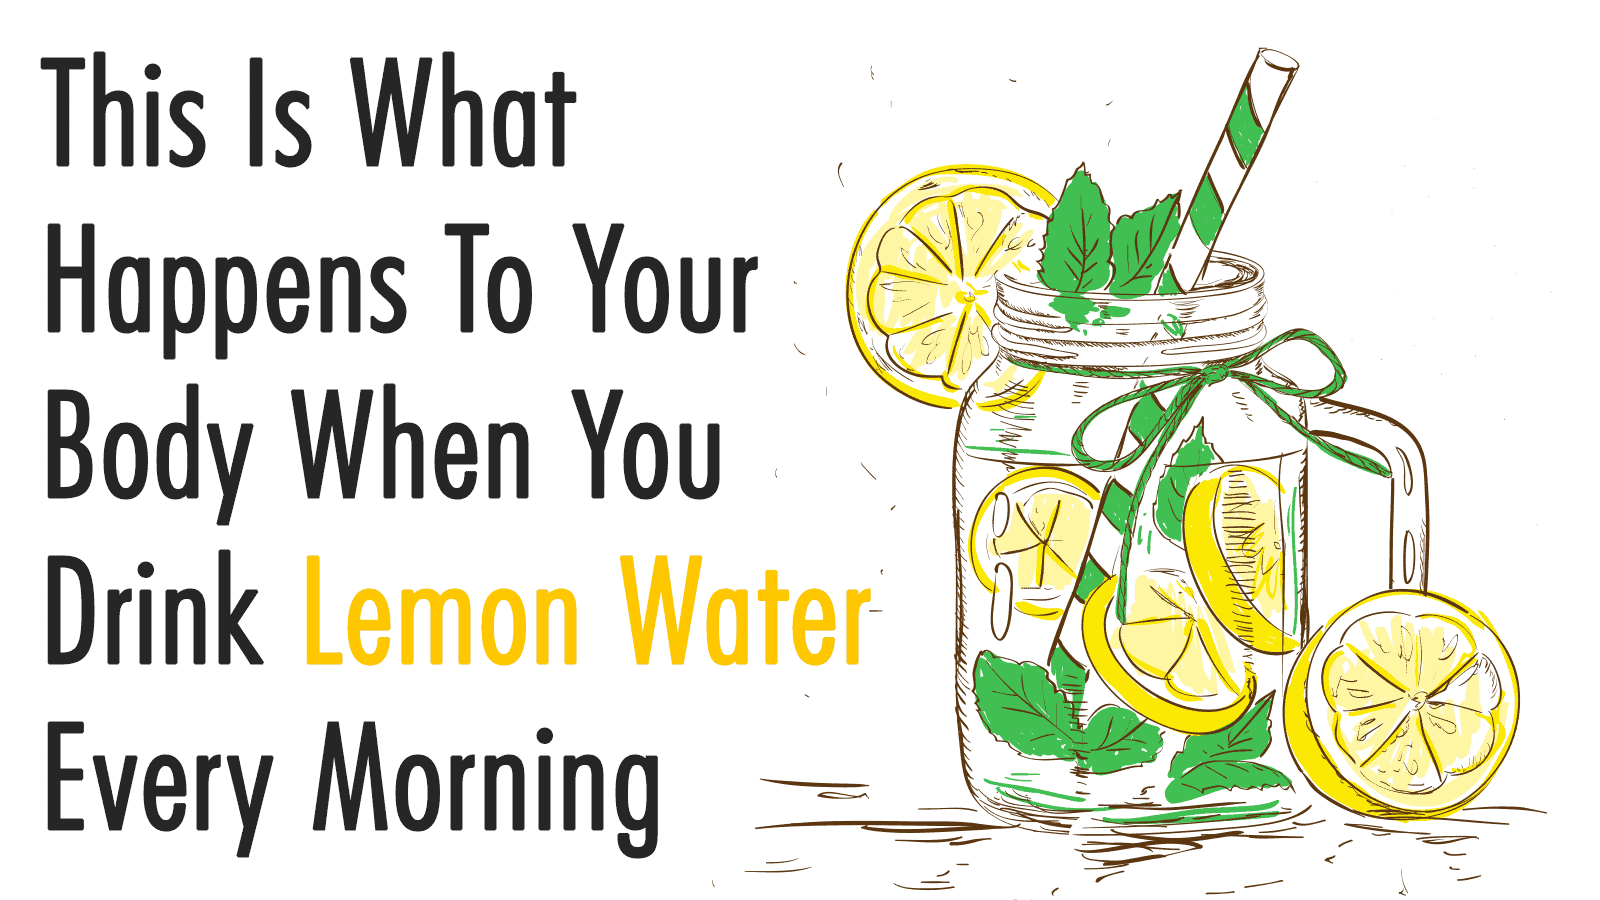 This Is What Happens To Your Body When You Drink Lemon Water Every Morning